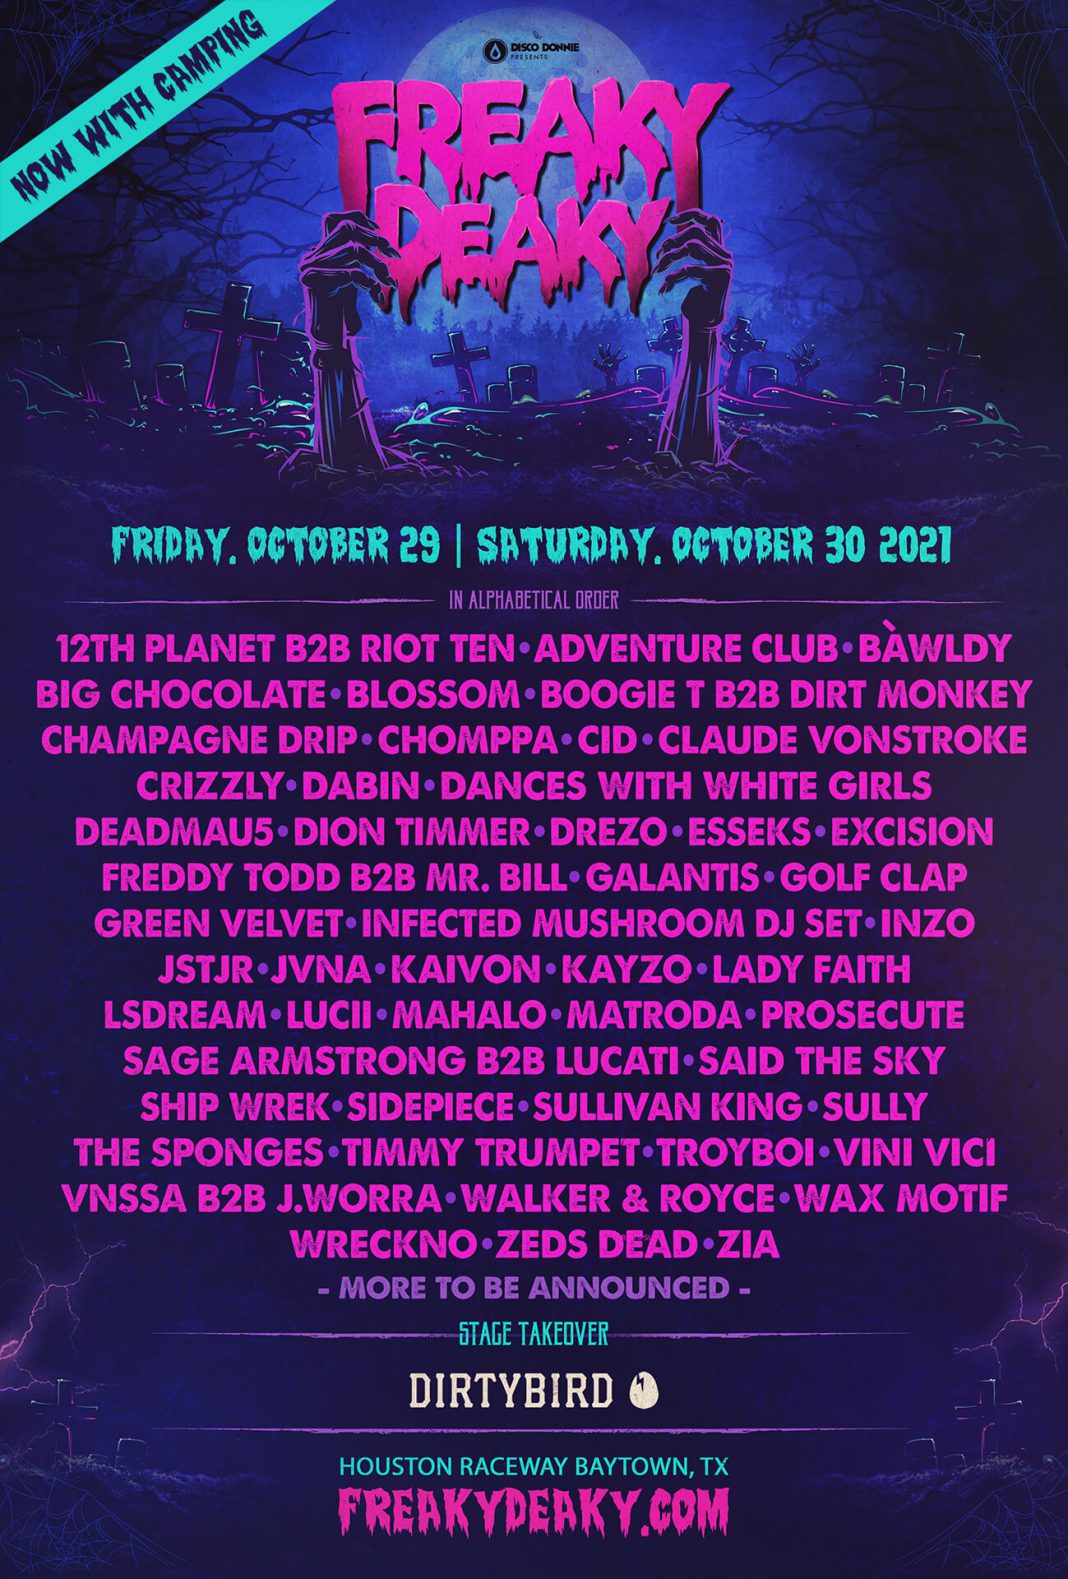 Freaky Deaky Announces Initial Lineup for Halloween Weekend EDM Identity